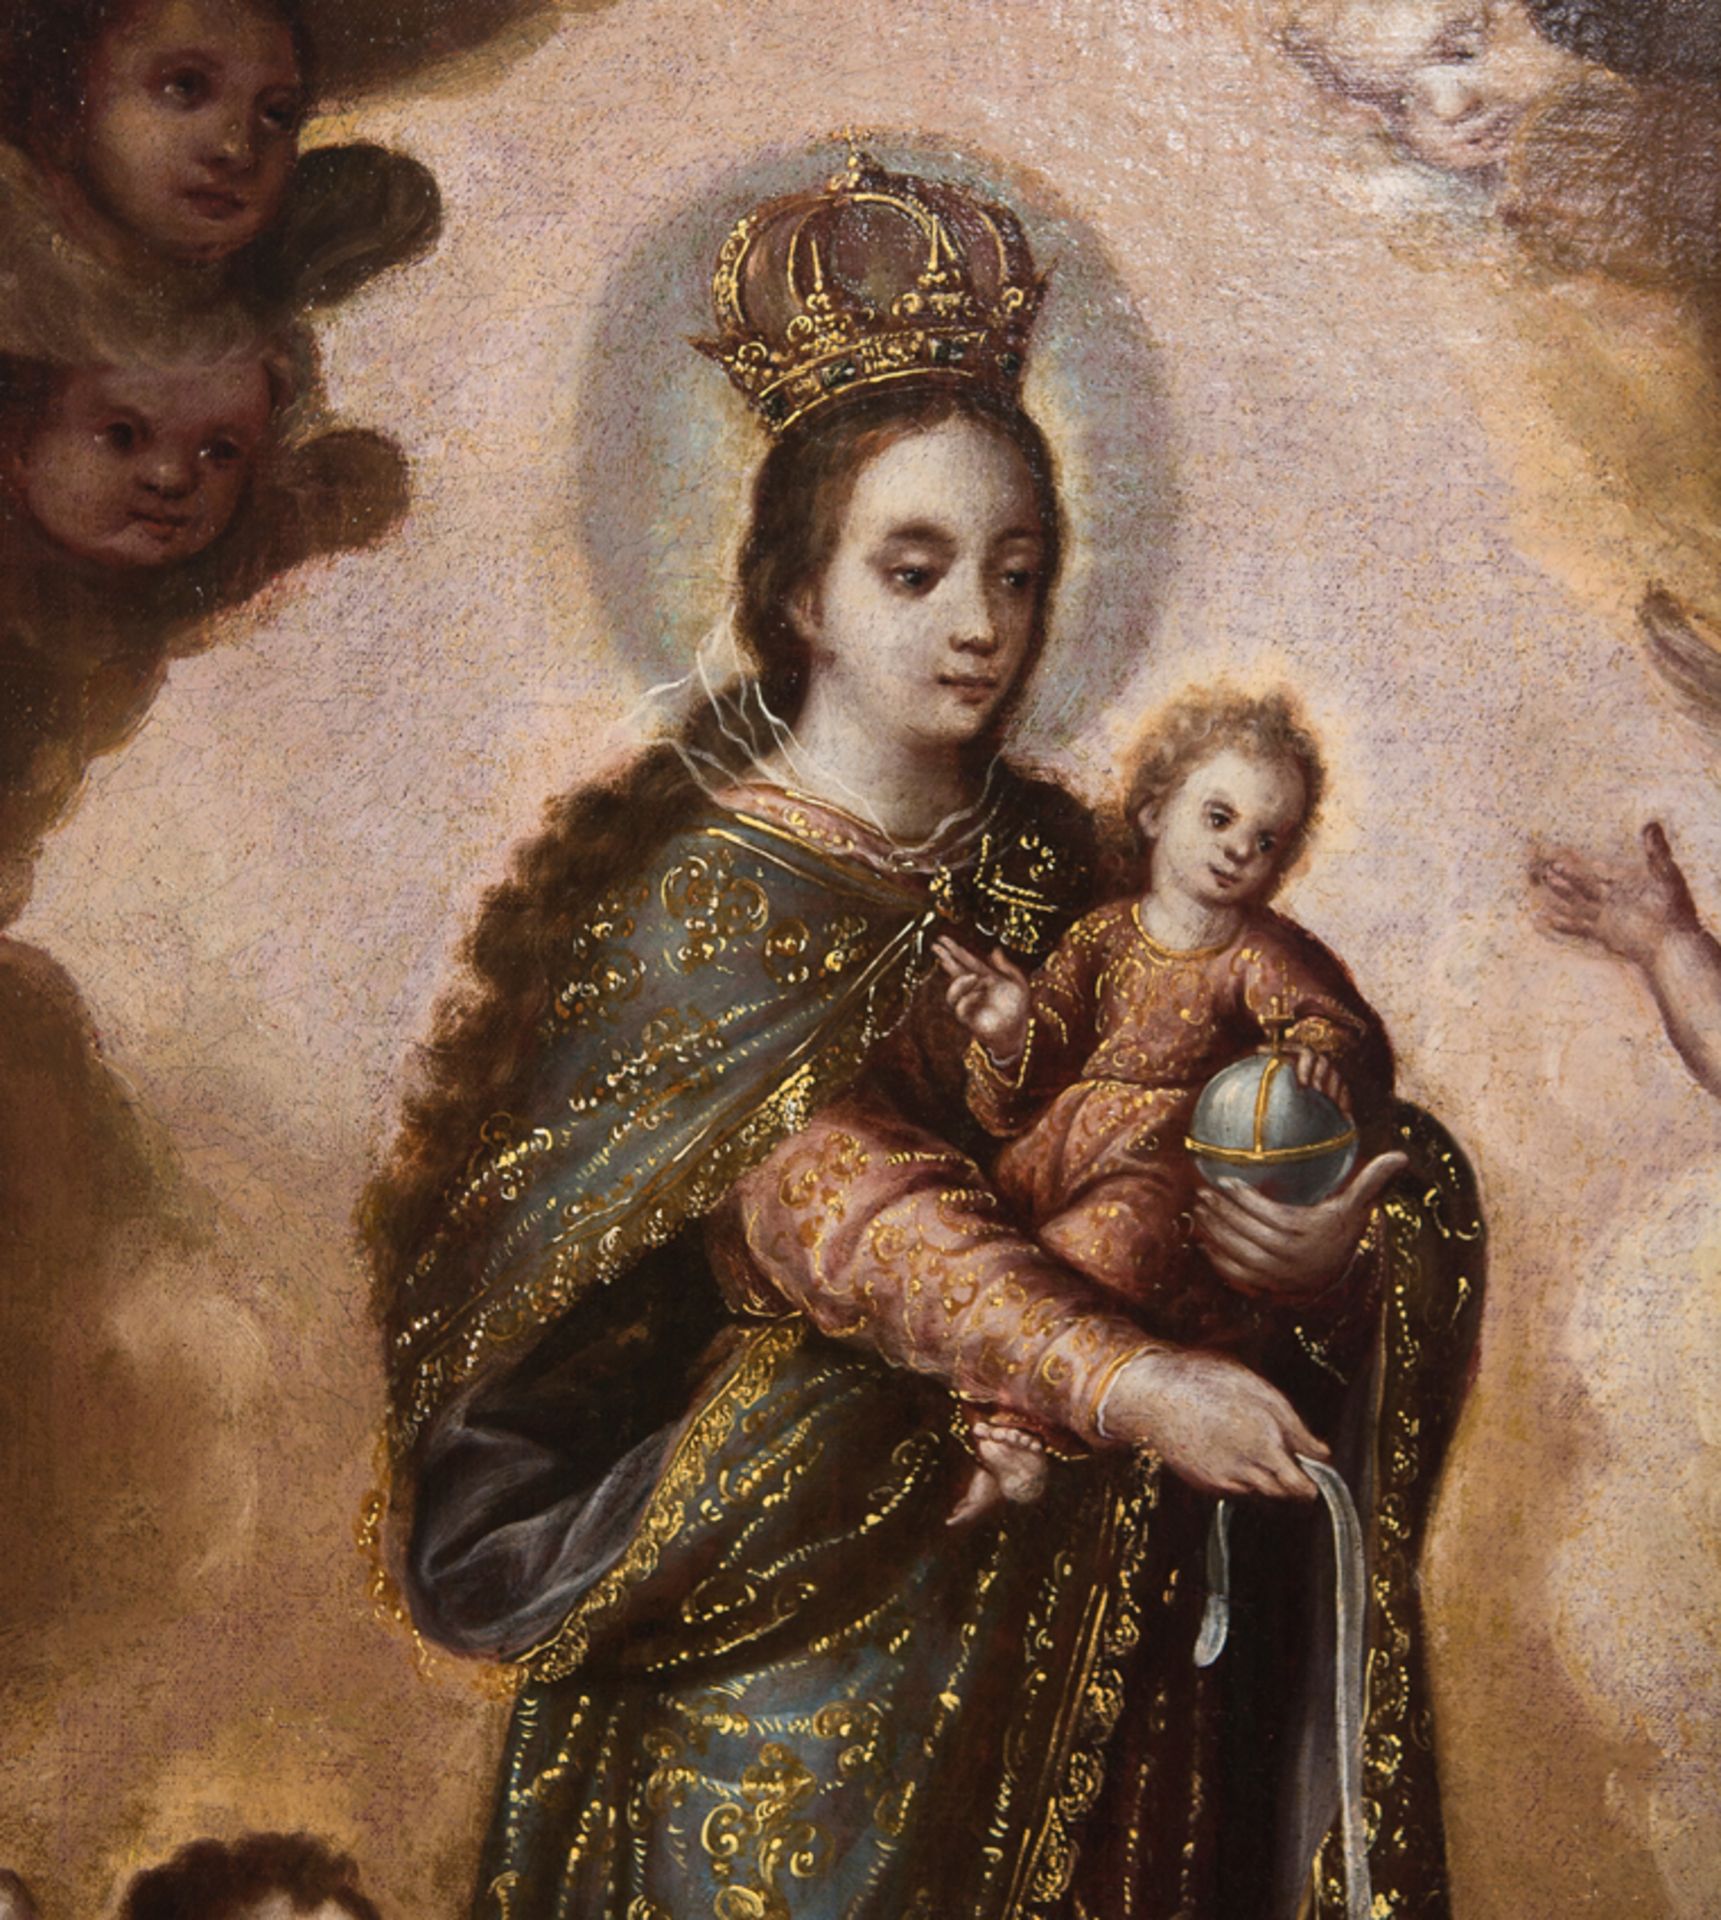 Attributed to Juan Correa (Mexico City, 1646 - 1716) - Image 2 of 9